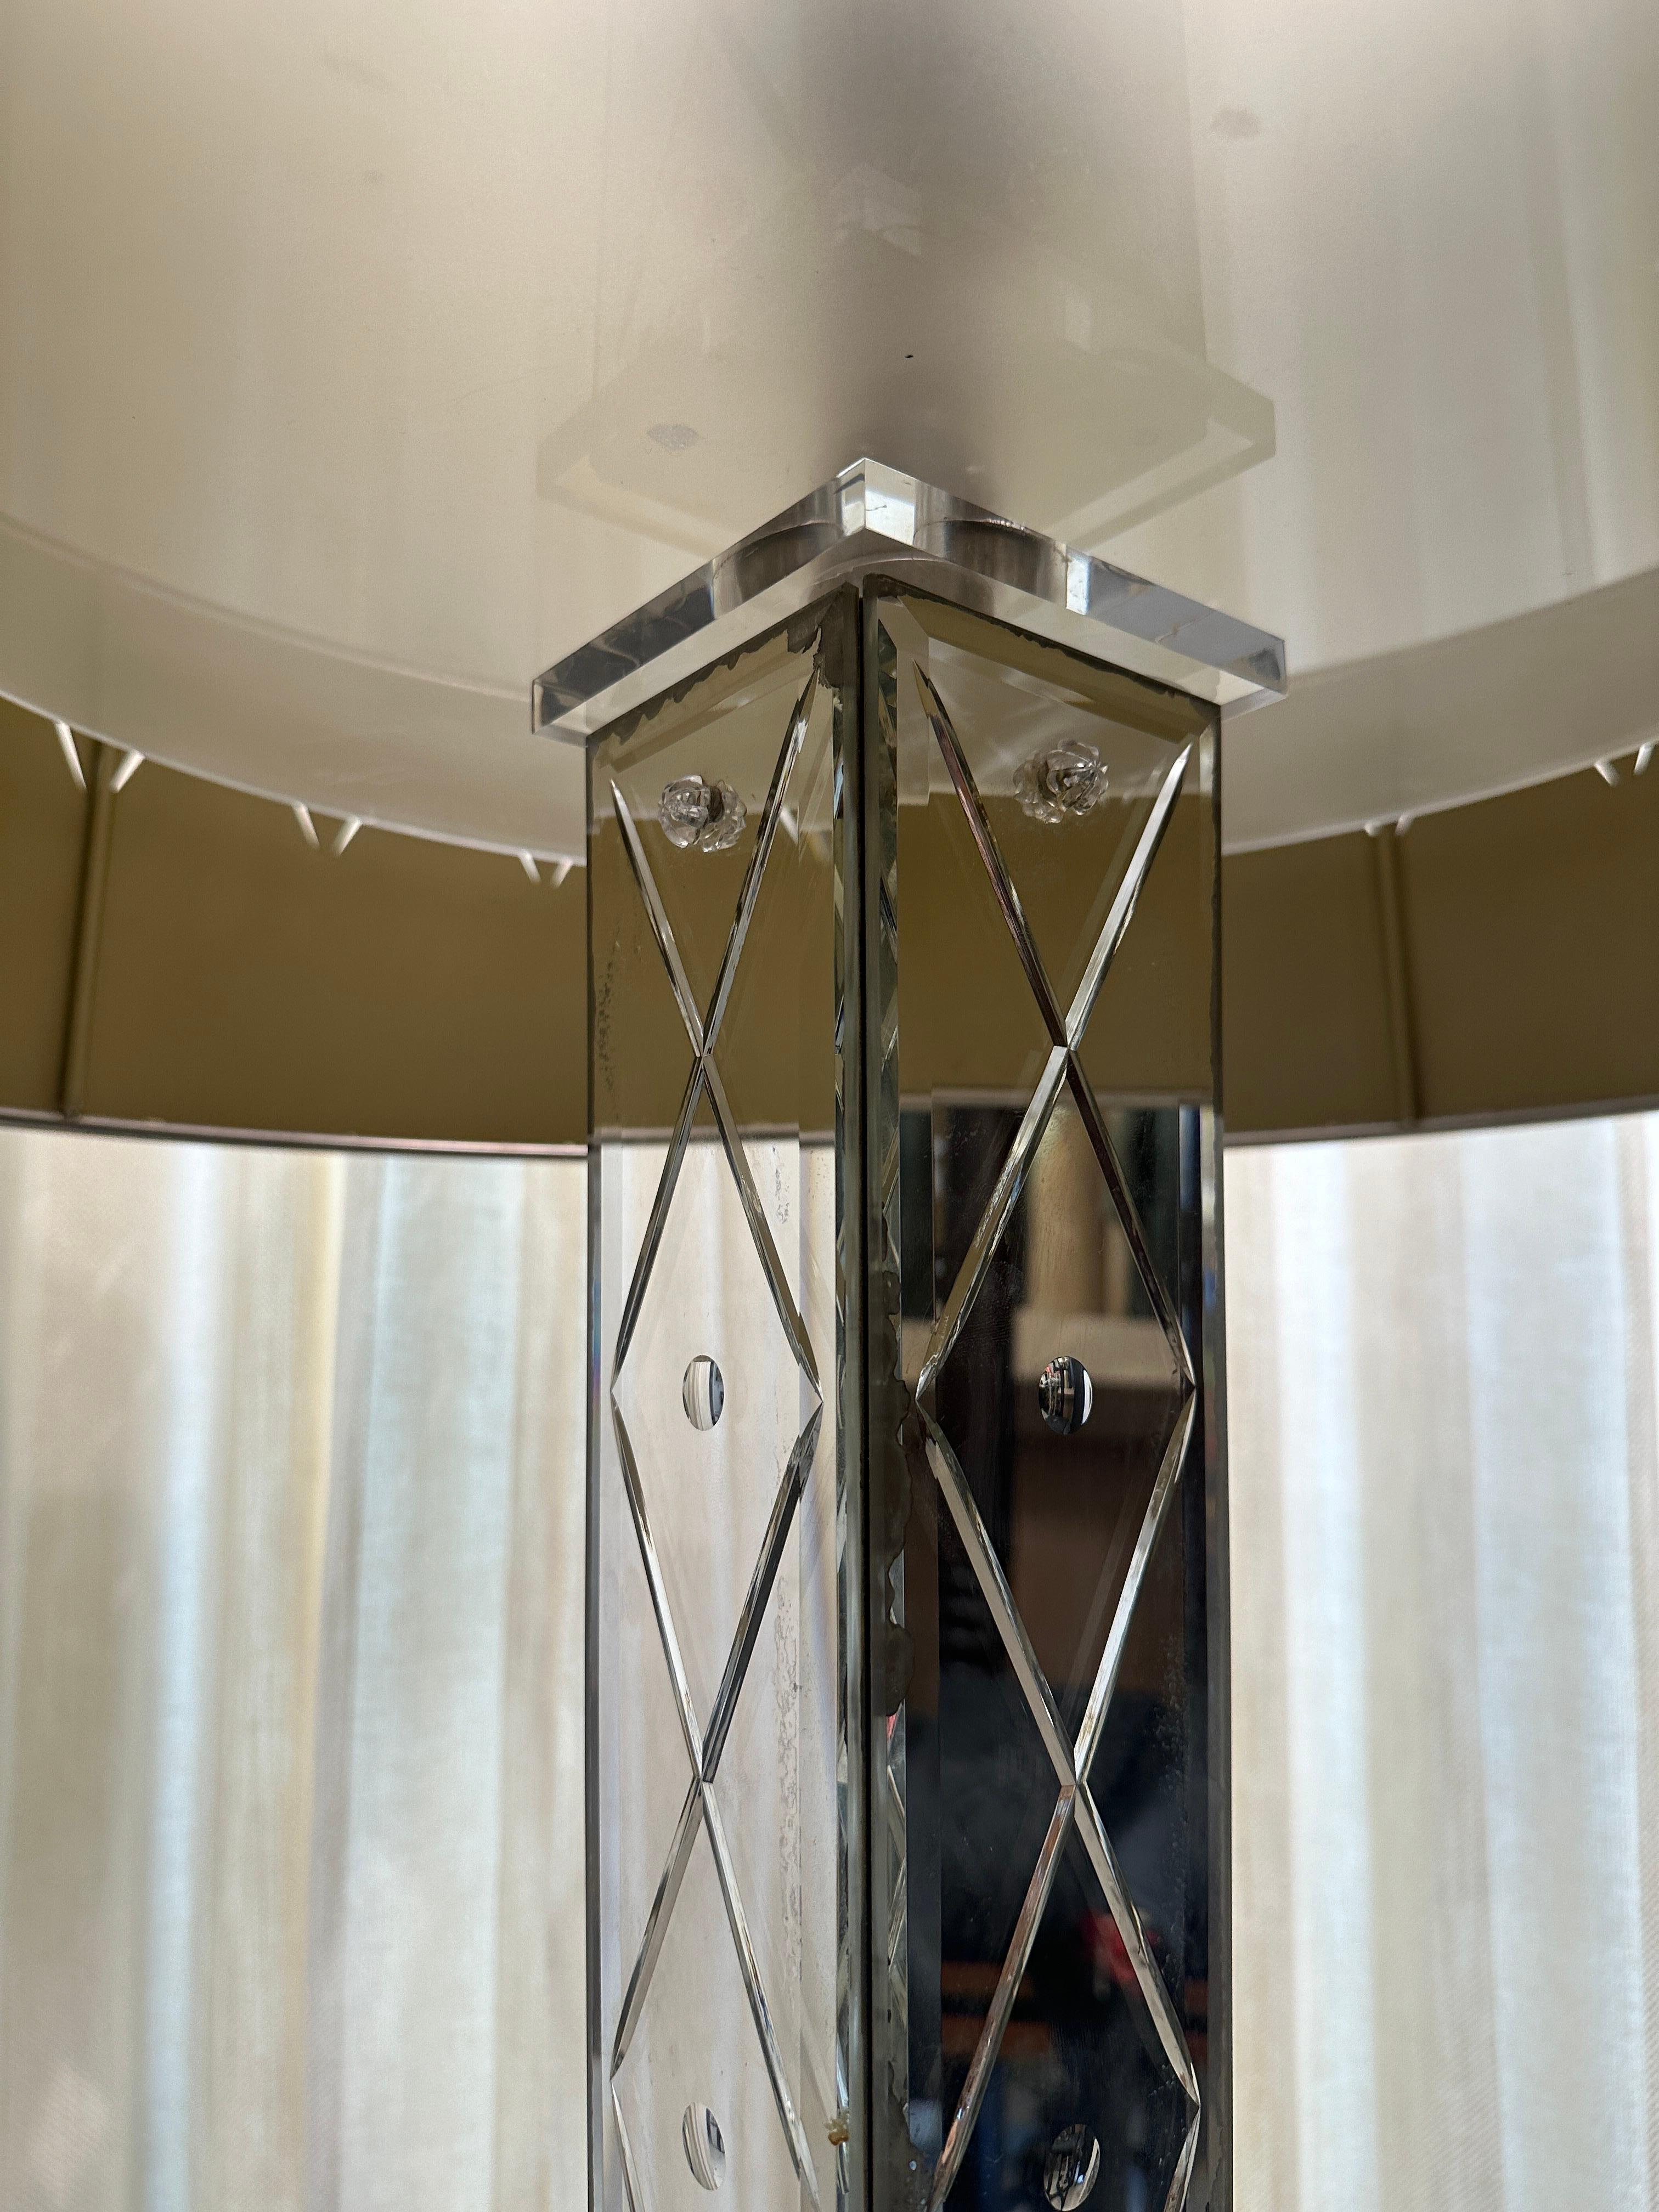 RARE Philippe Starck Etched Mirror Floor Lamp - Delano Hotel South Beach For Sale 2